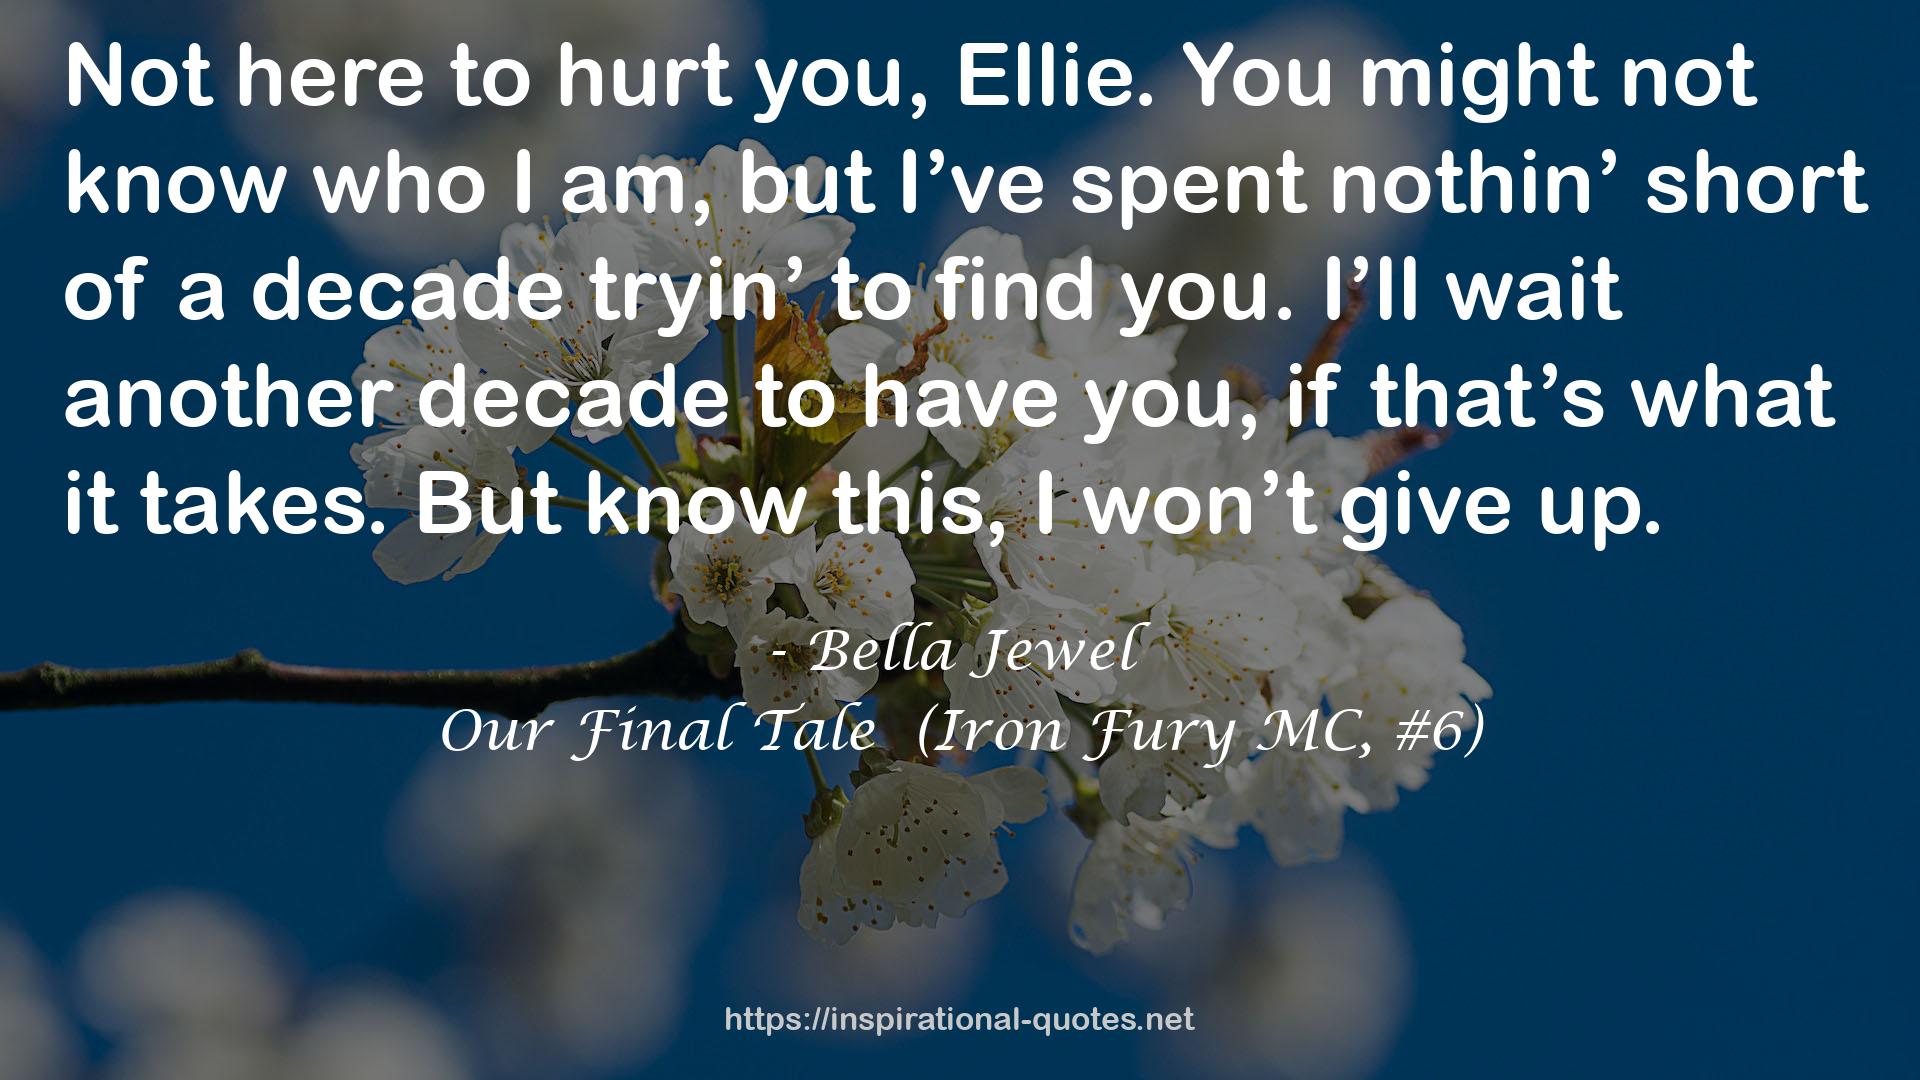 Our Final Tale  (Iron Fury MC, #6) QUOTES